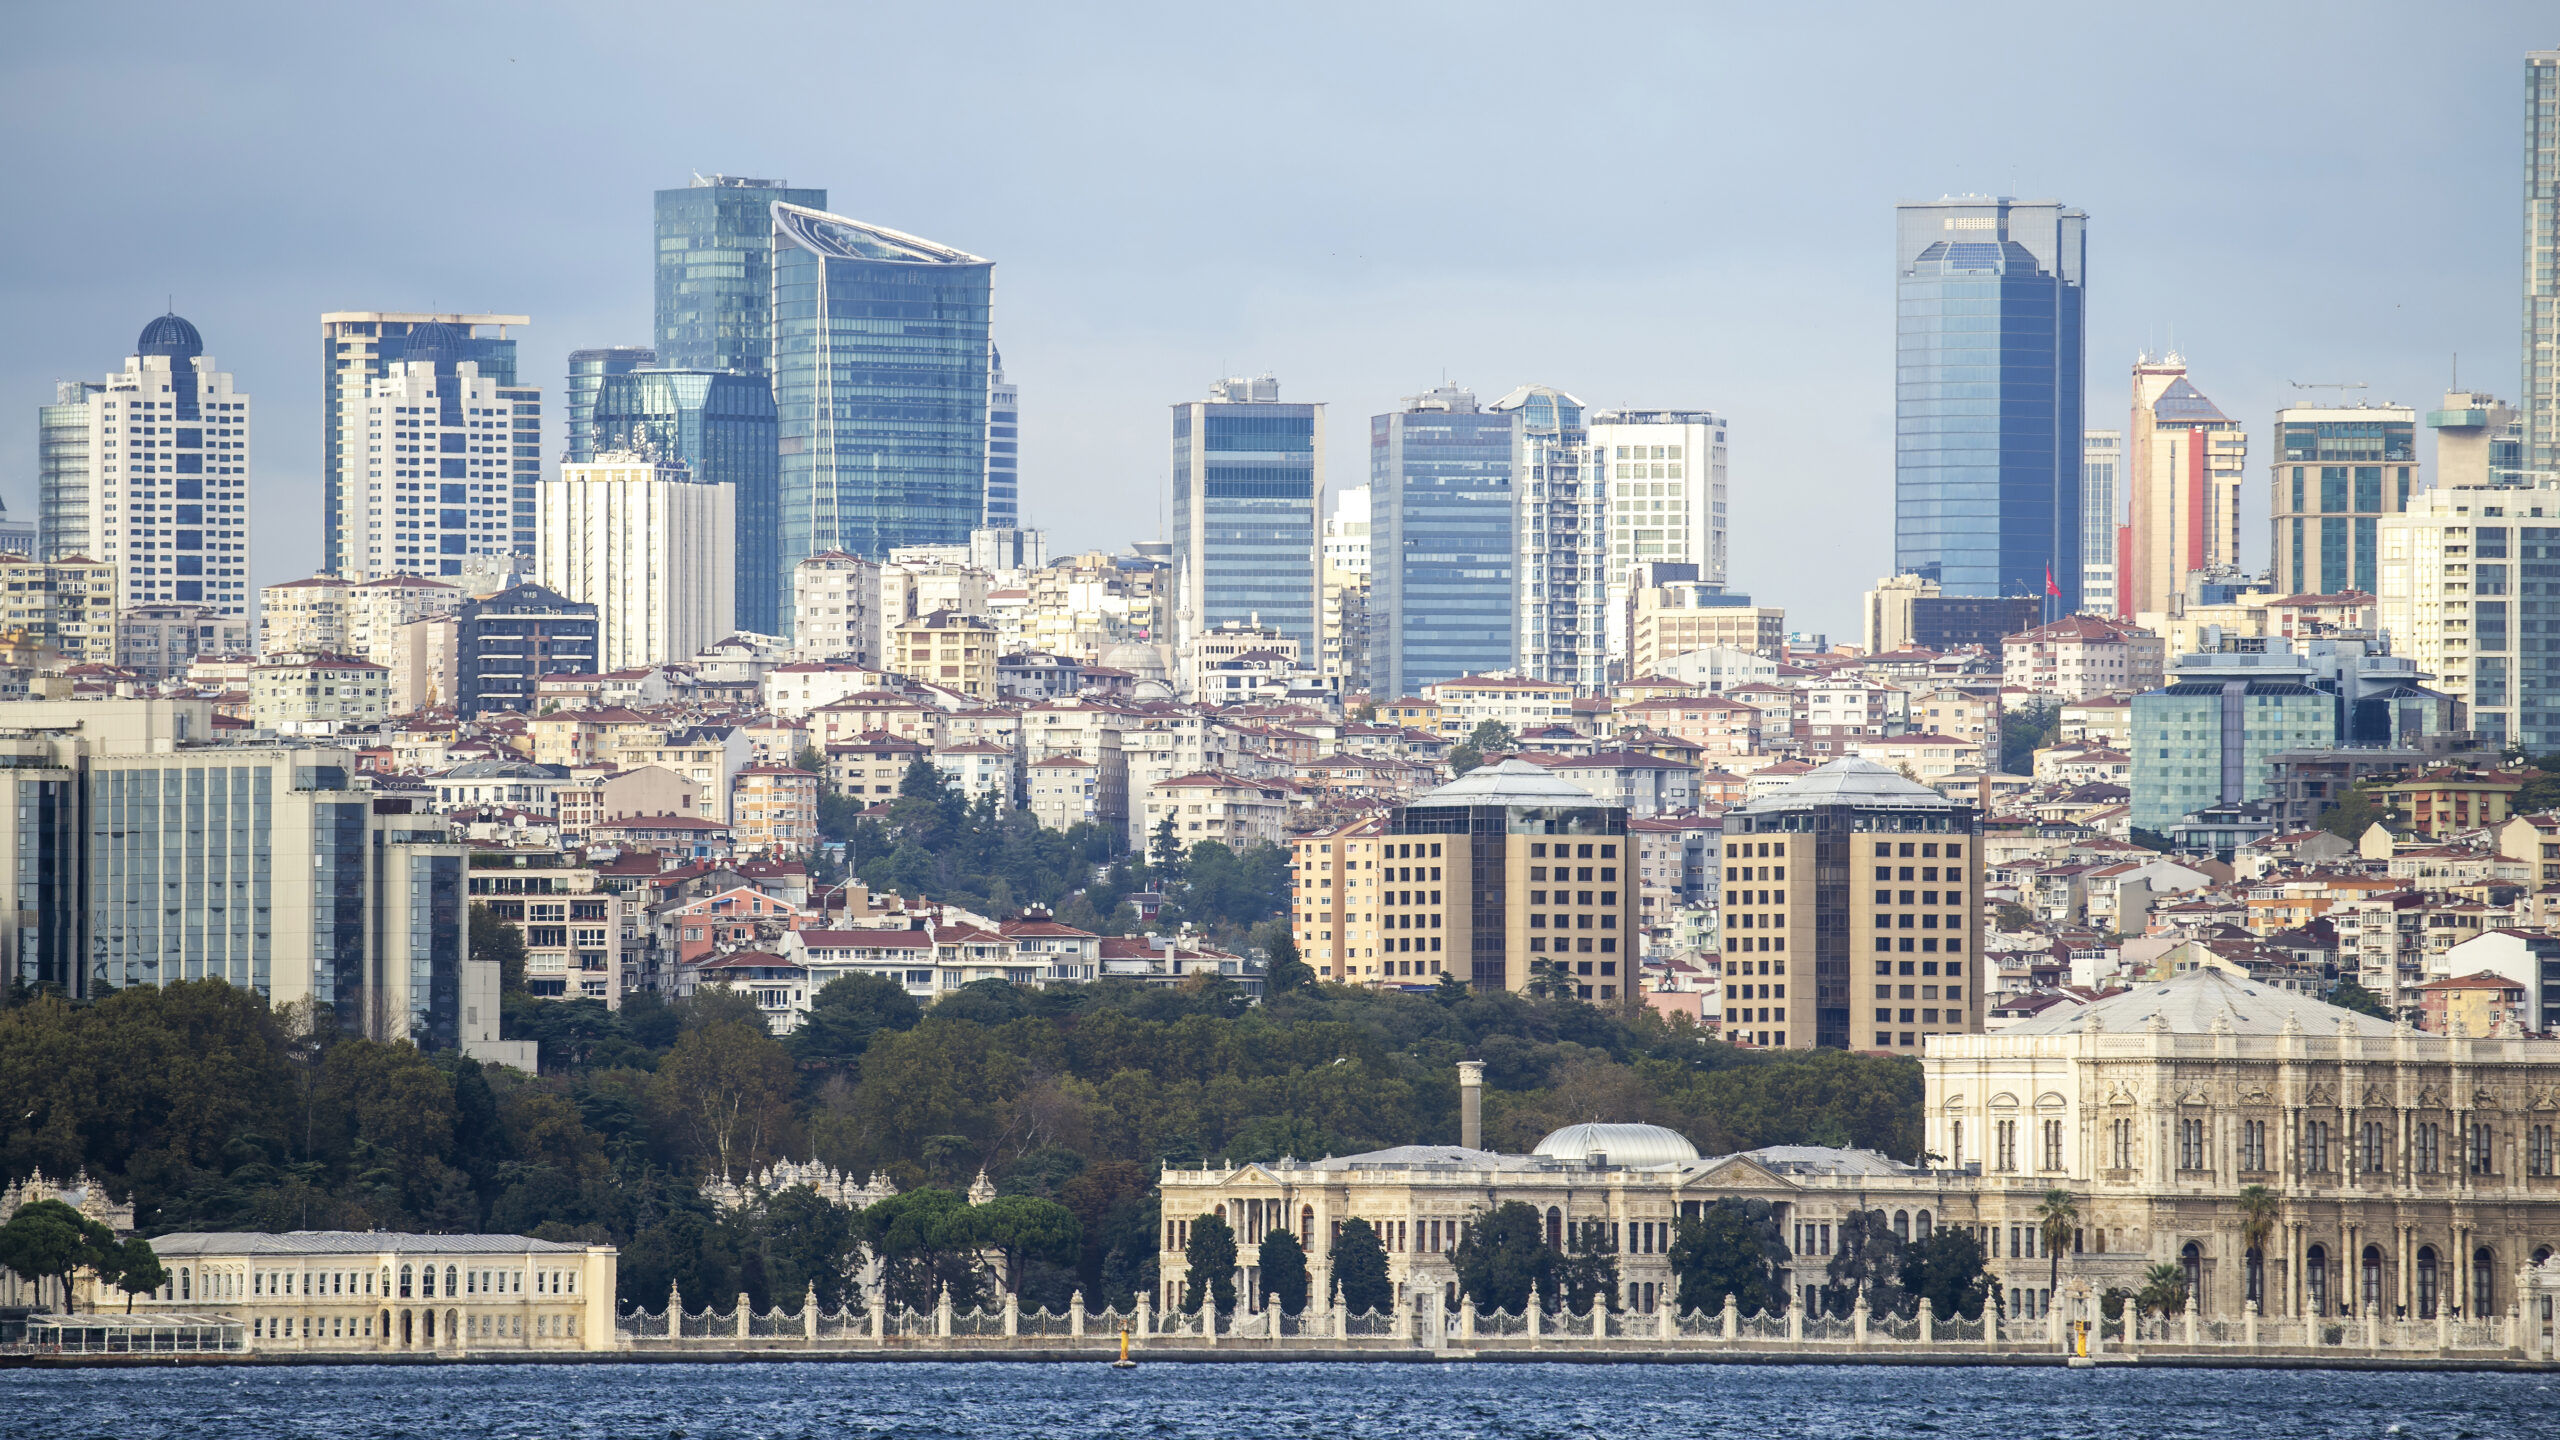 view district with residential high modern buildings istanbul bosphorus strait foreground turkey scaled